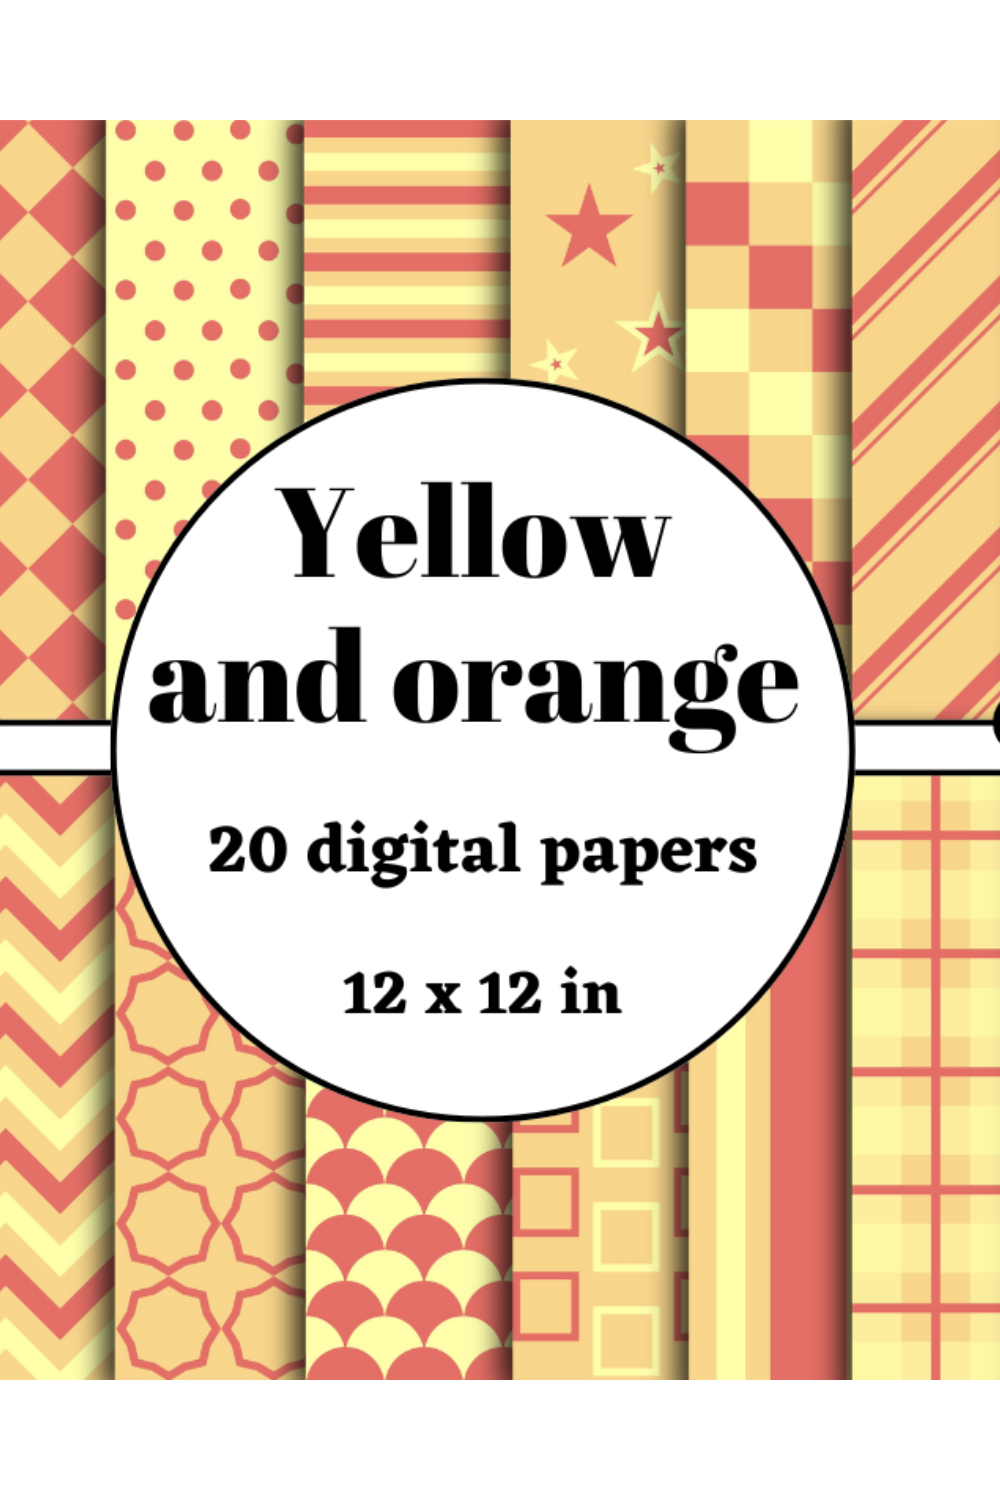 Yellow and orange digital papers pinterest preview image.